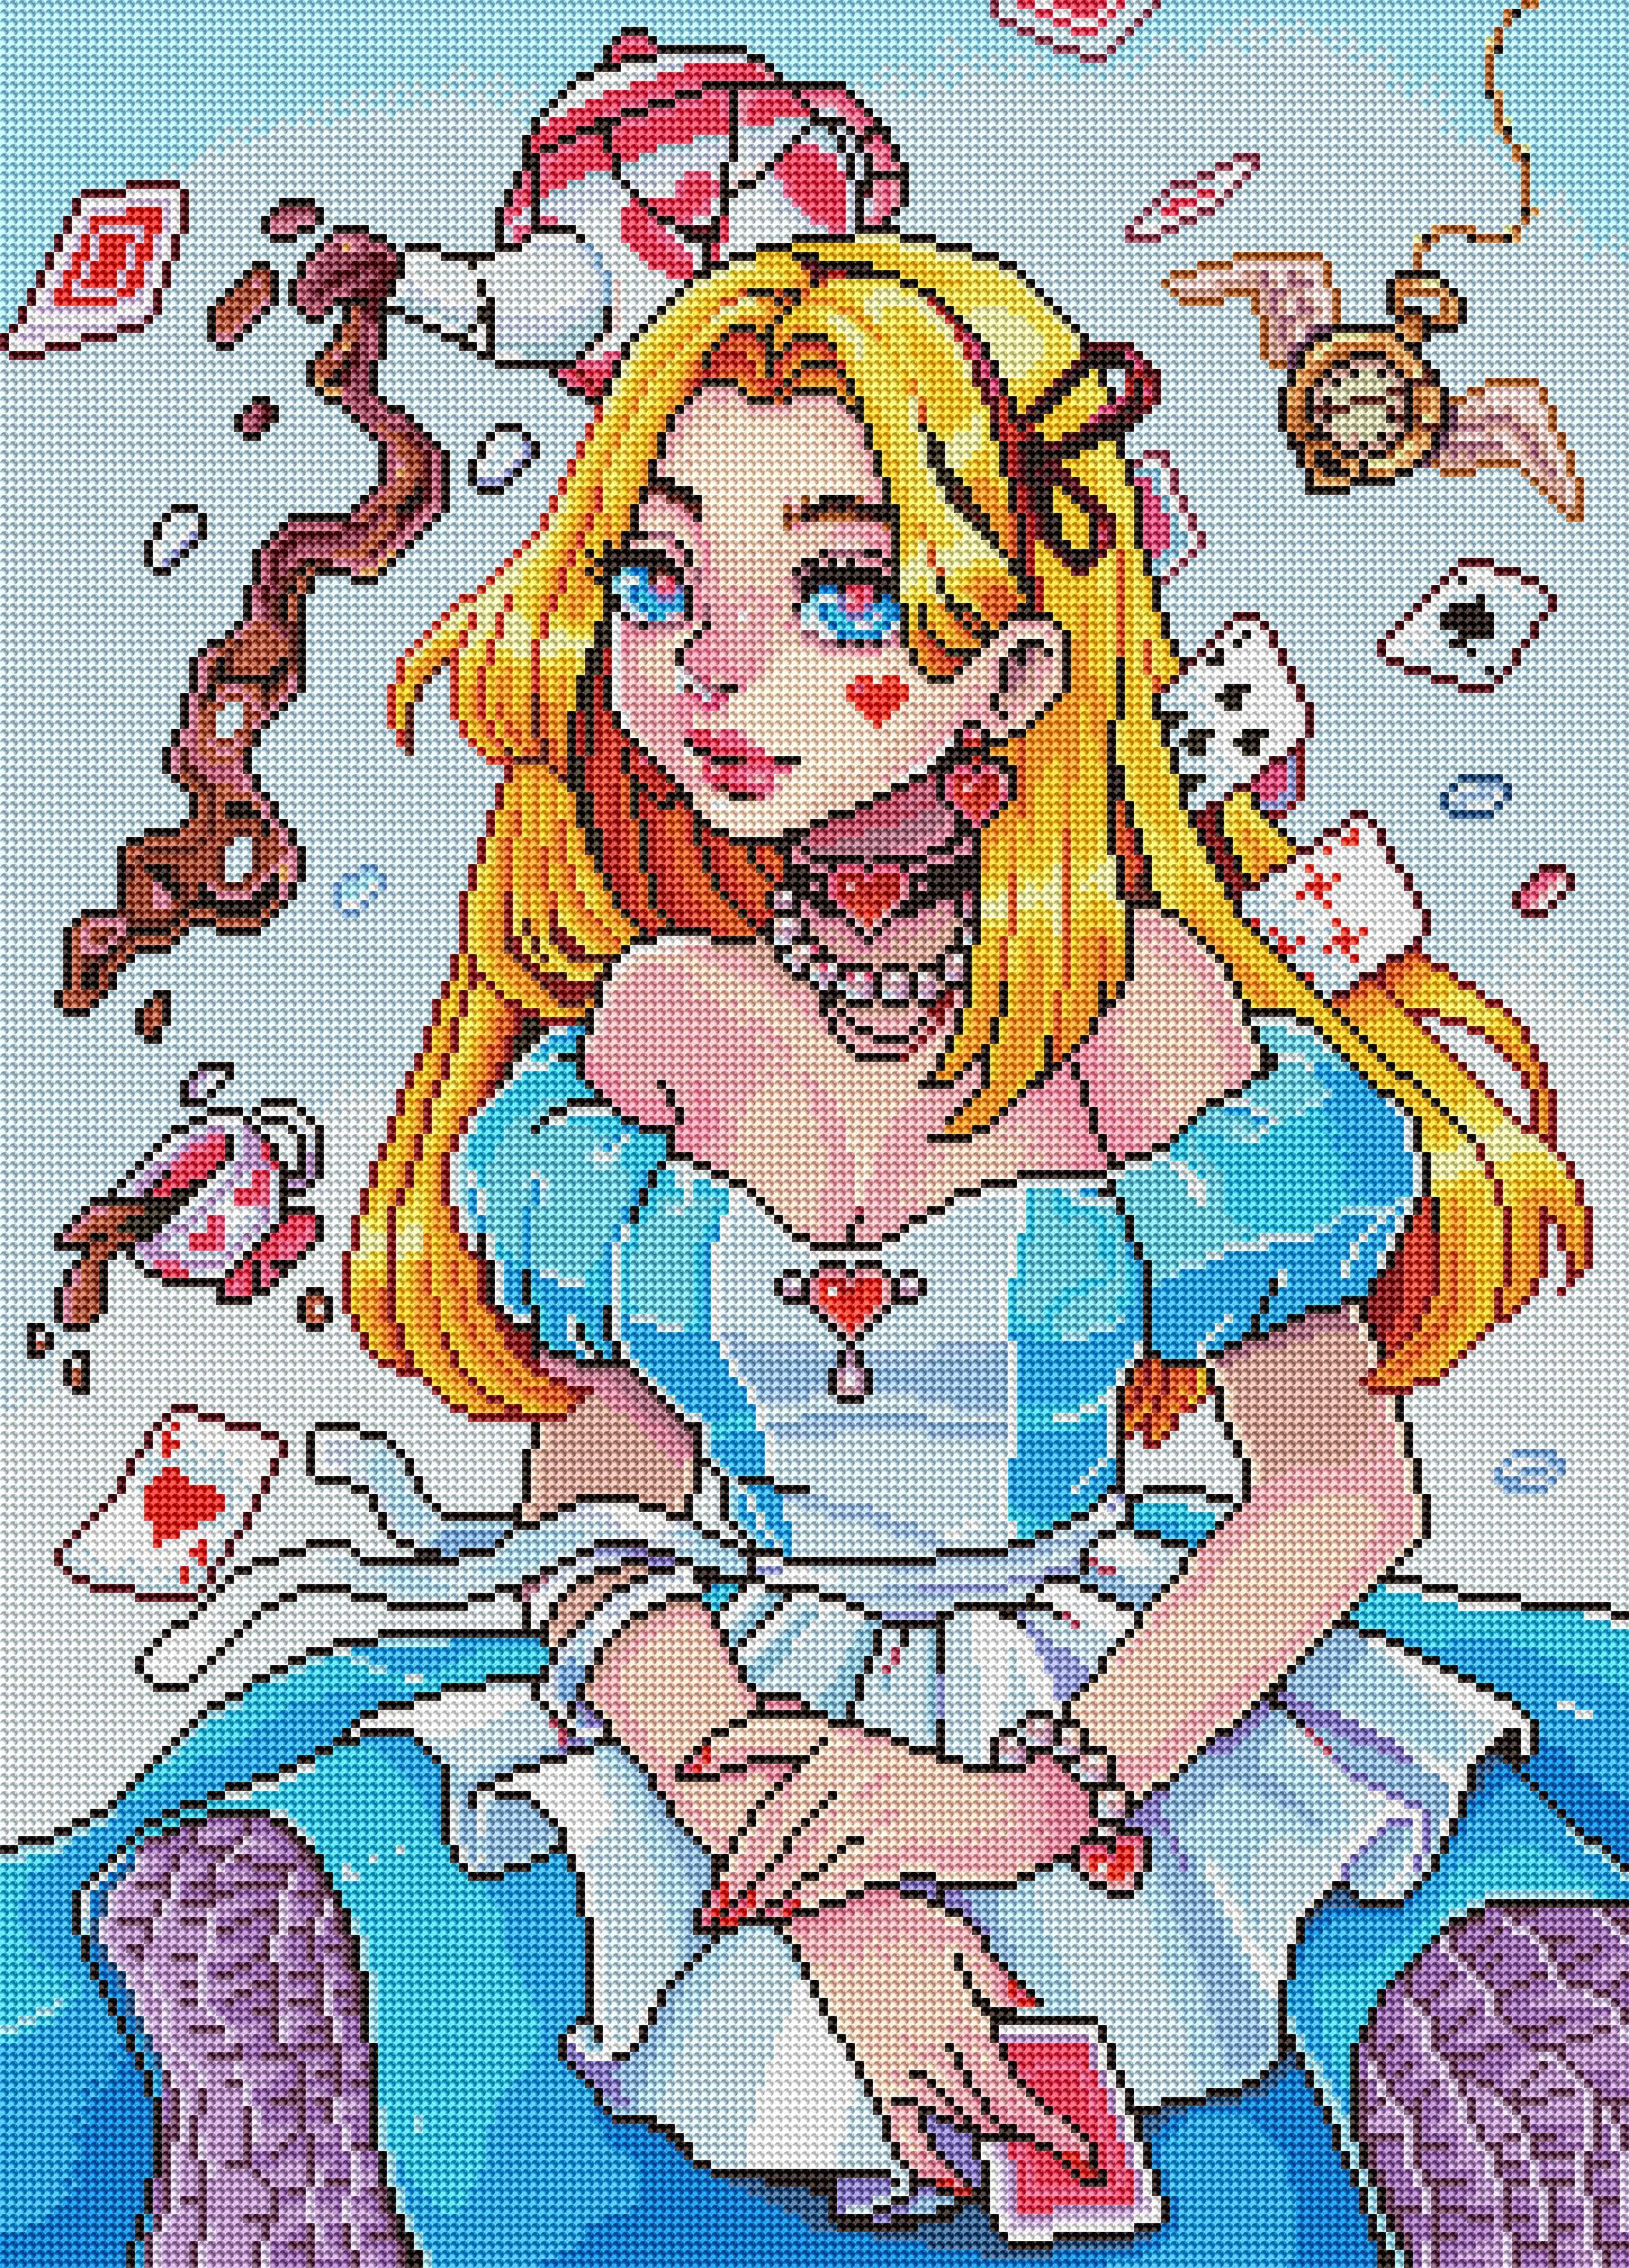 Diamond Painting - What Size?  Completed Alice in Wonderland